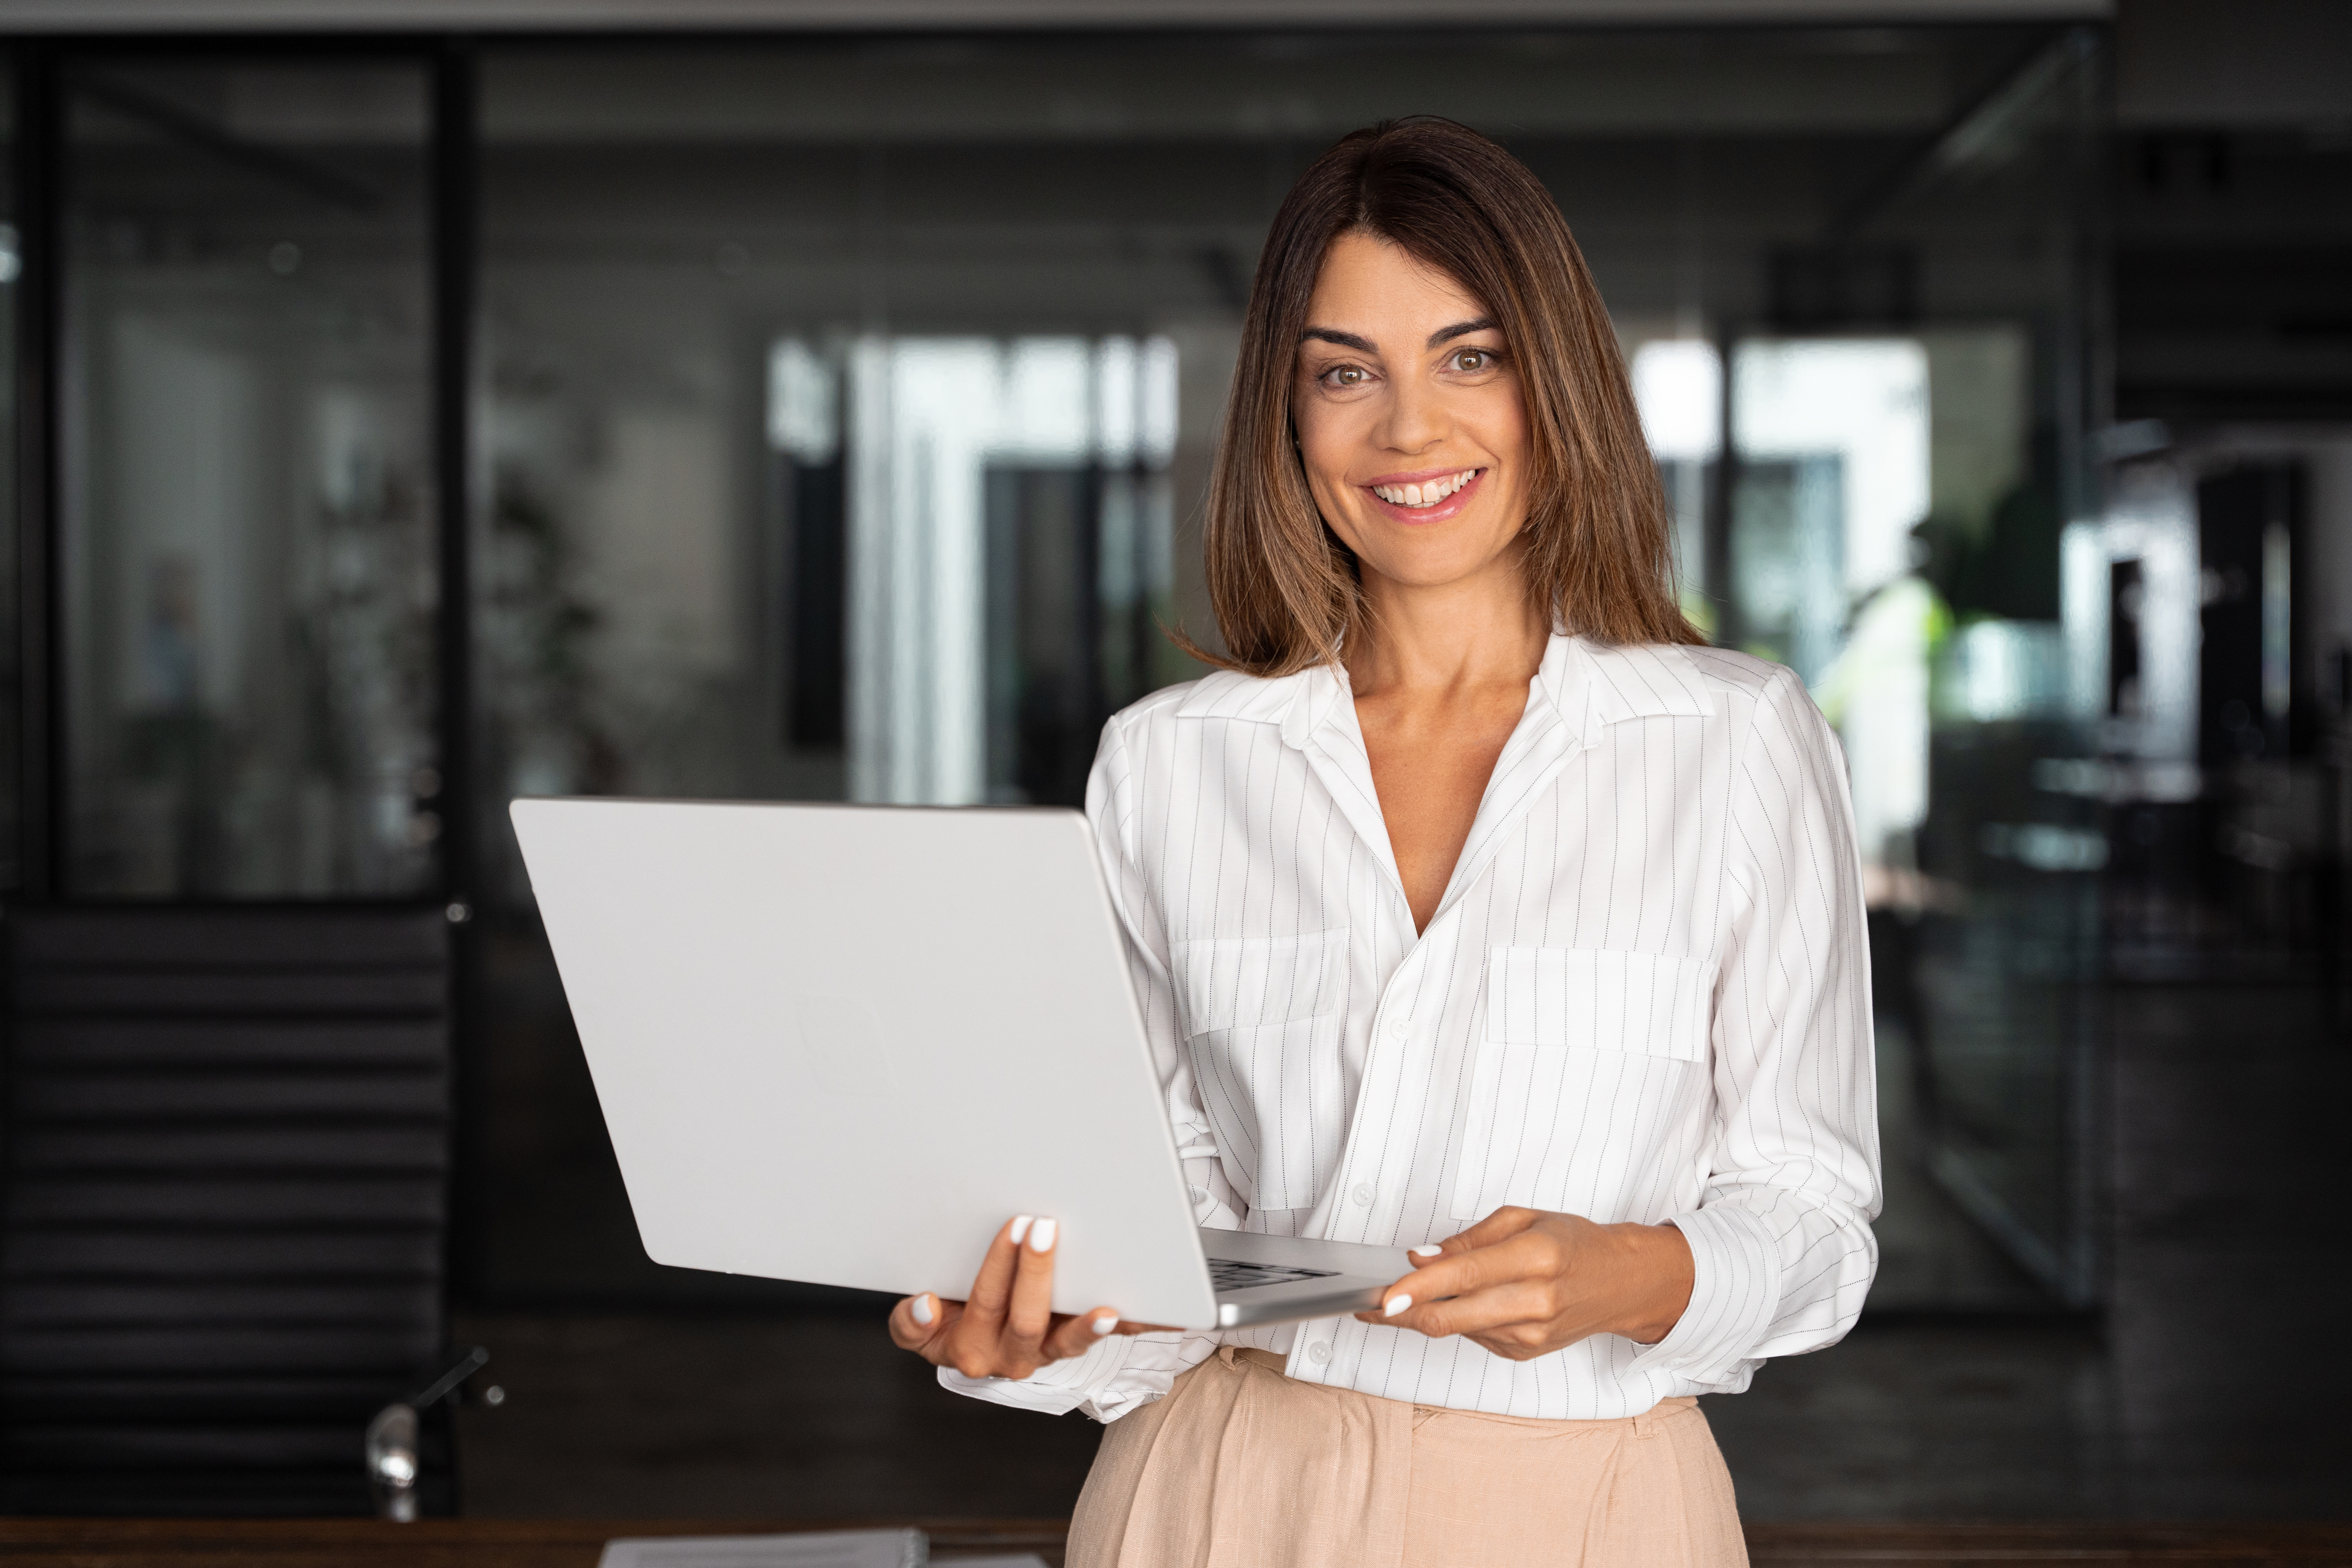 Woman holding a laptop in a business casual outfit, smiling at the camera